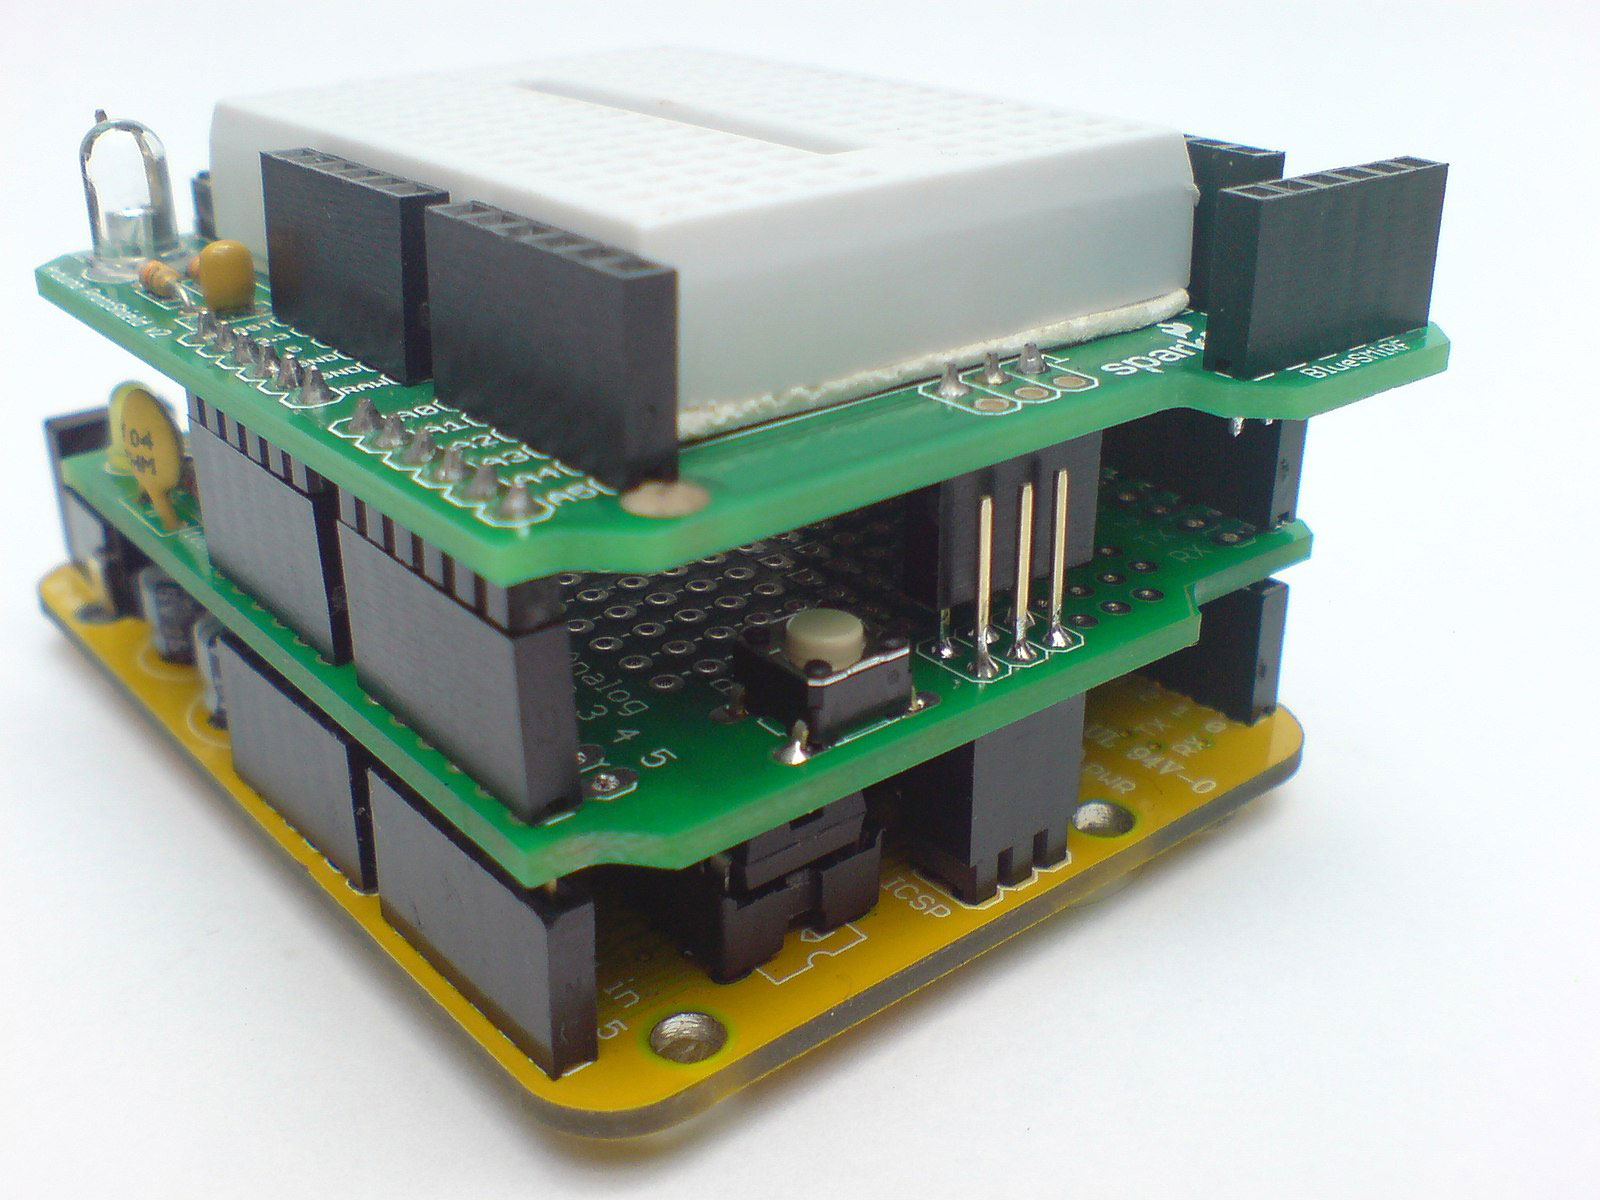 A prototype shield for Arduino with a mini breadboard attached